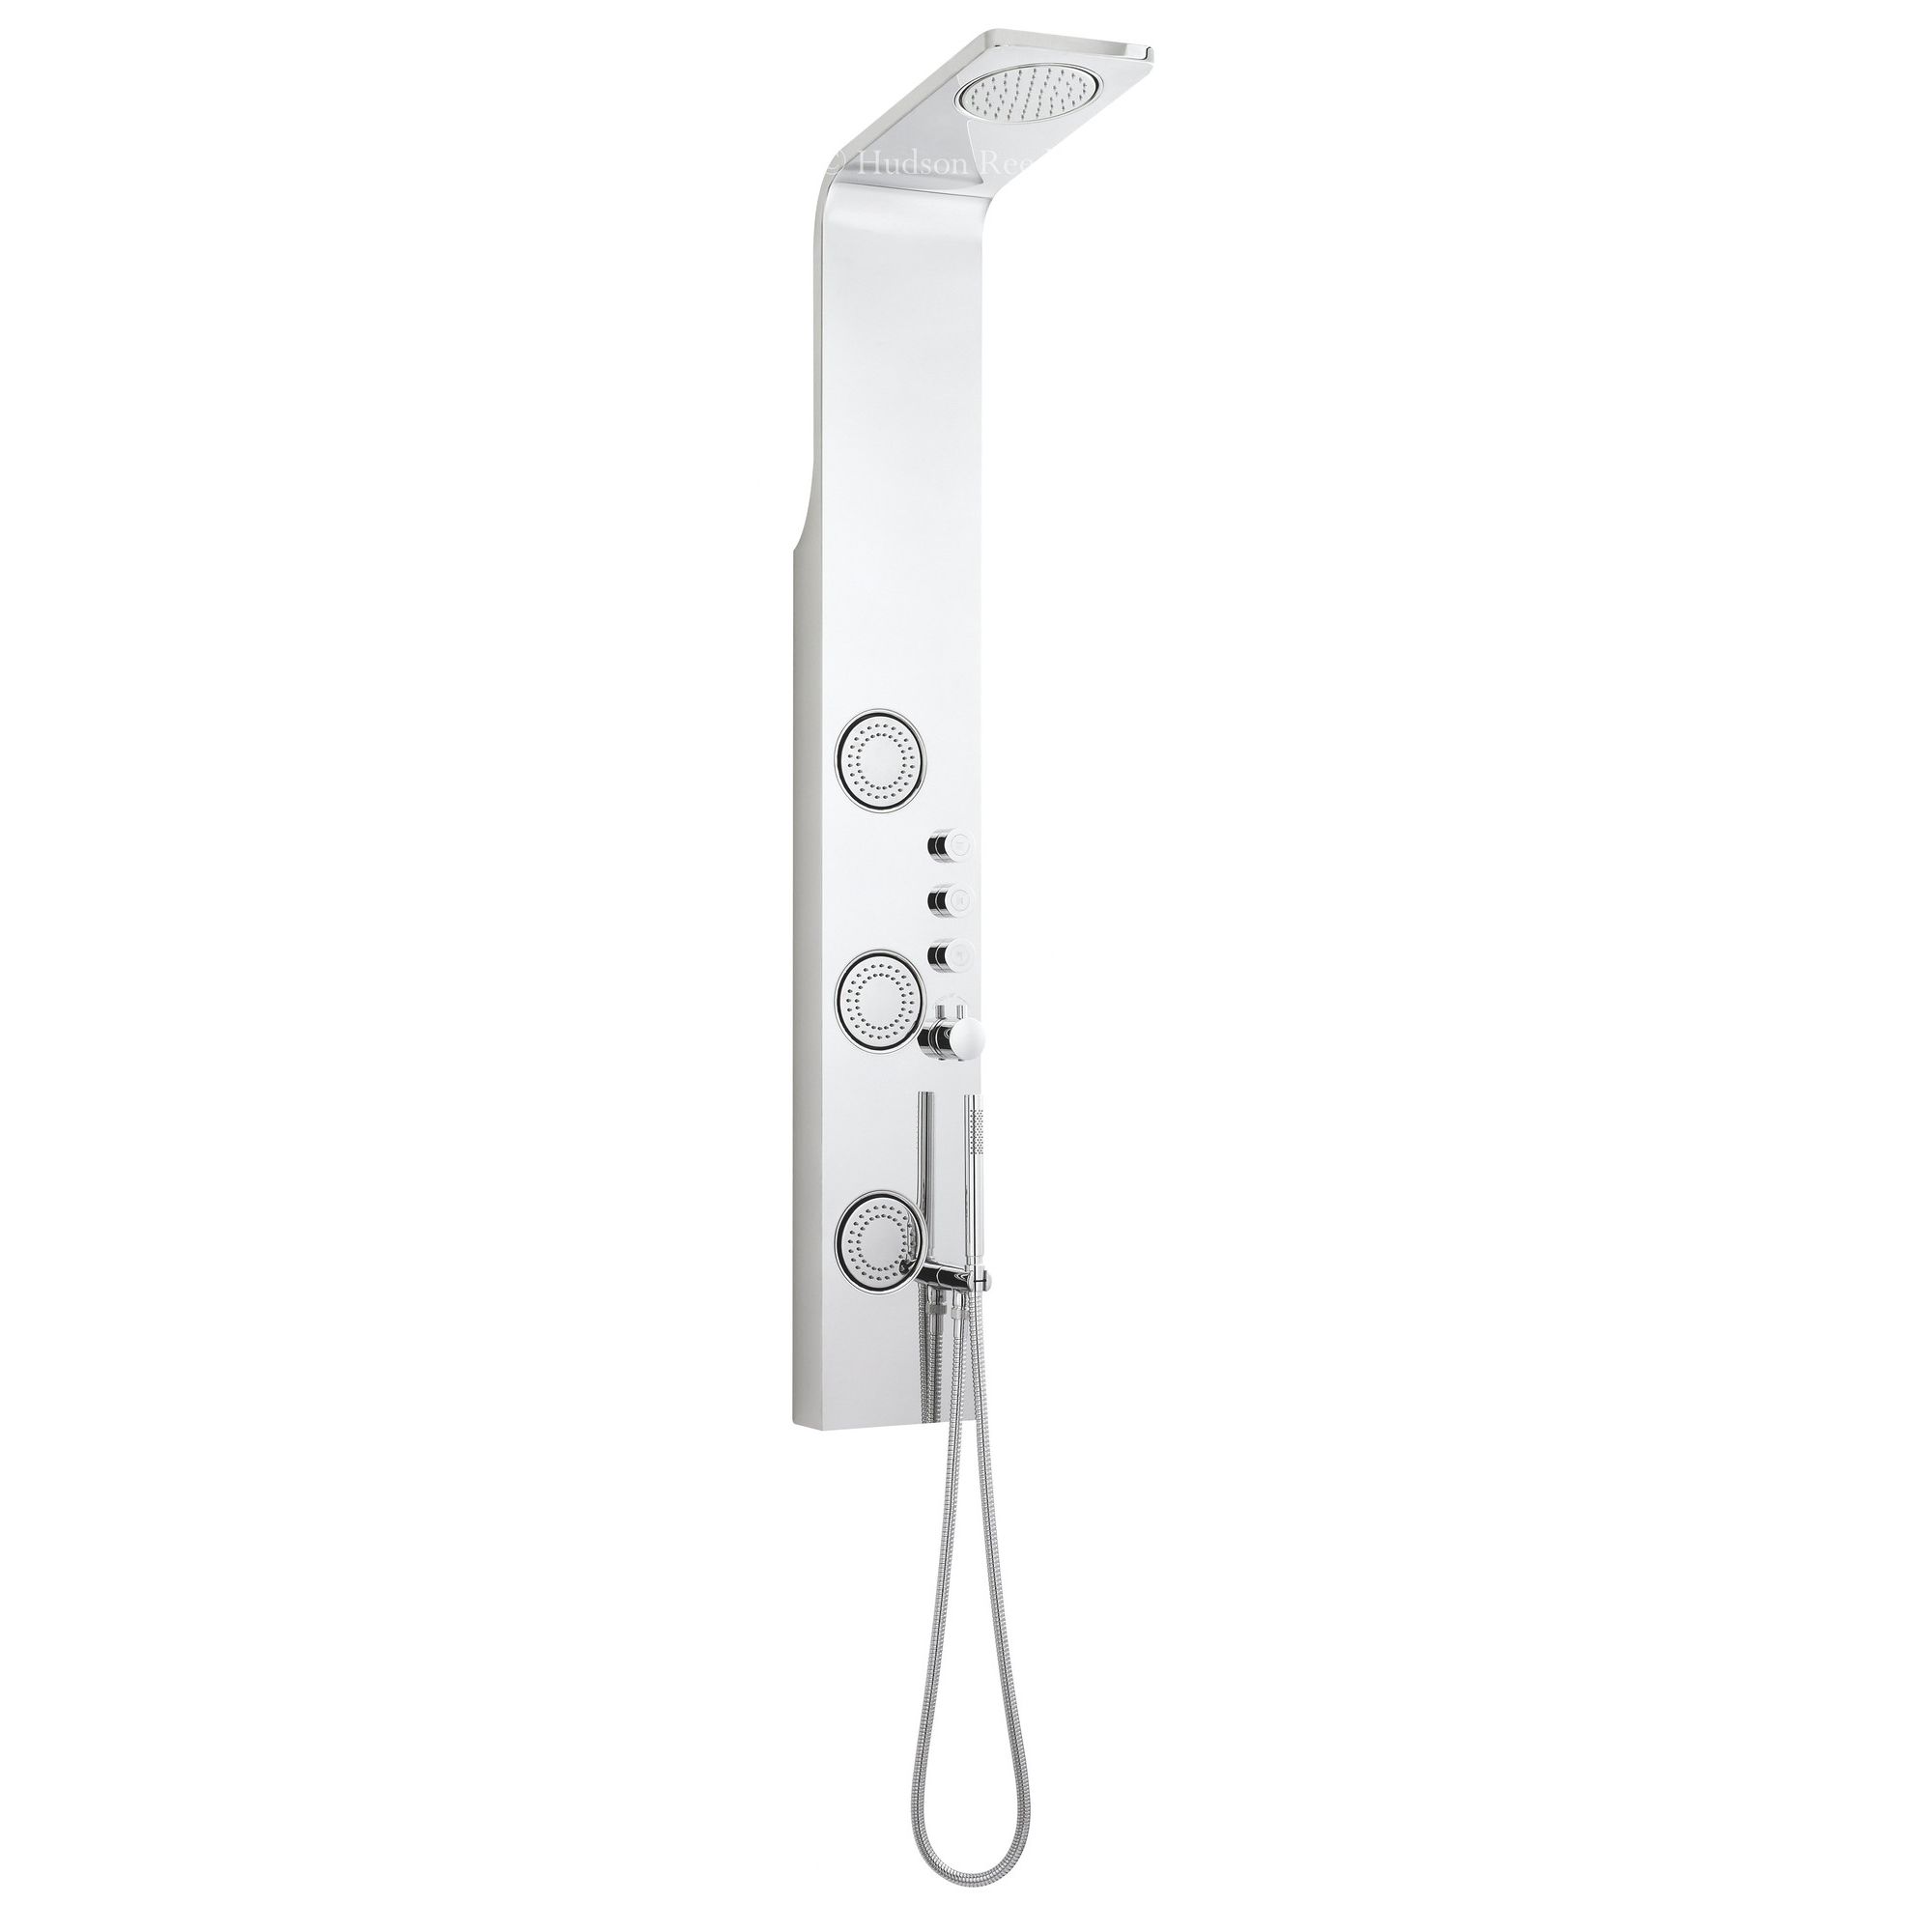 Hudson Reed Erato Thermostatic Shower Panel at Tesco Direct